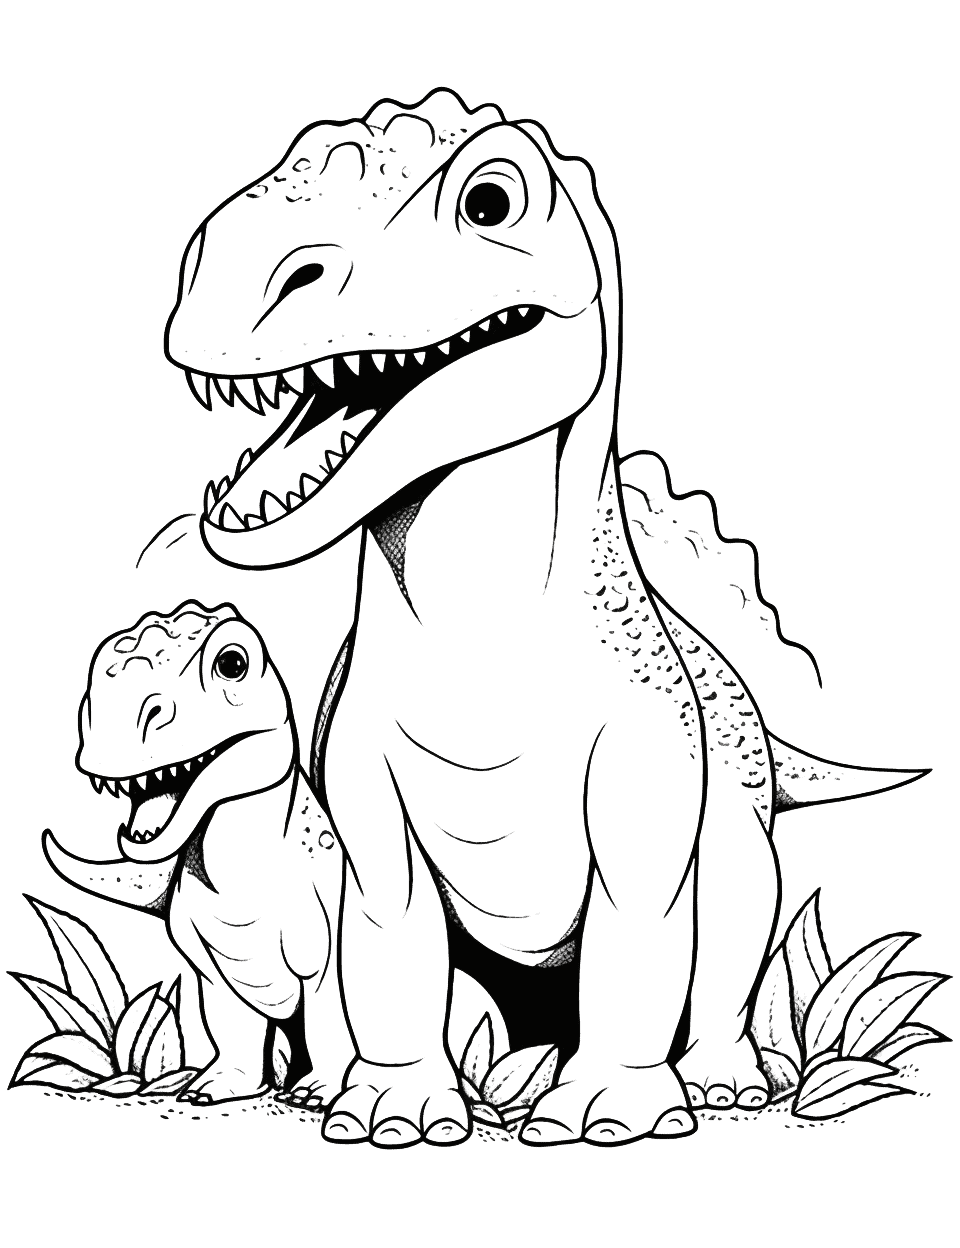 T-Rex Family Dinosaur Coloring Page - A family of T-Rex, featuring a parent and baby T-Rex.